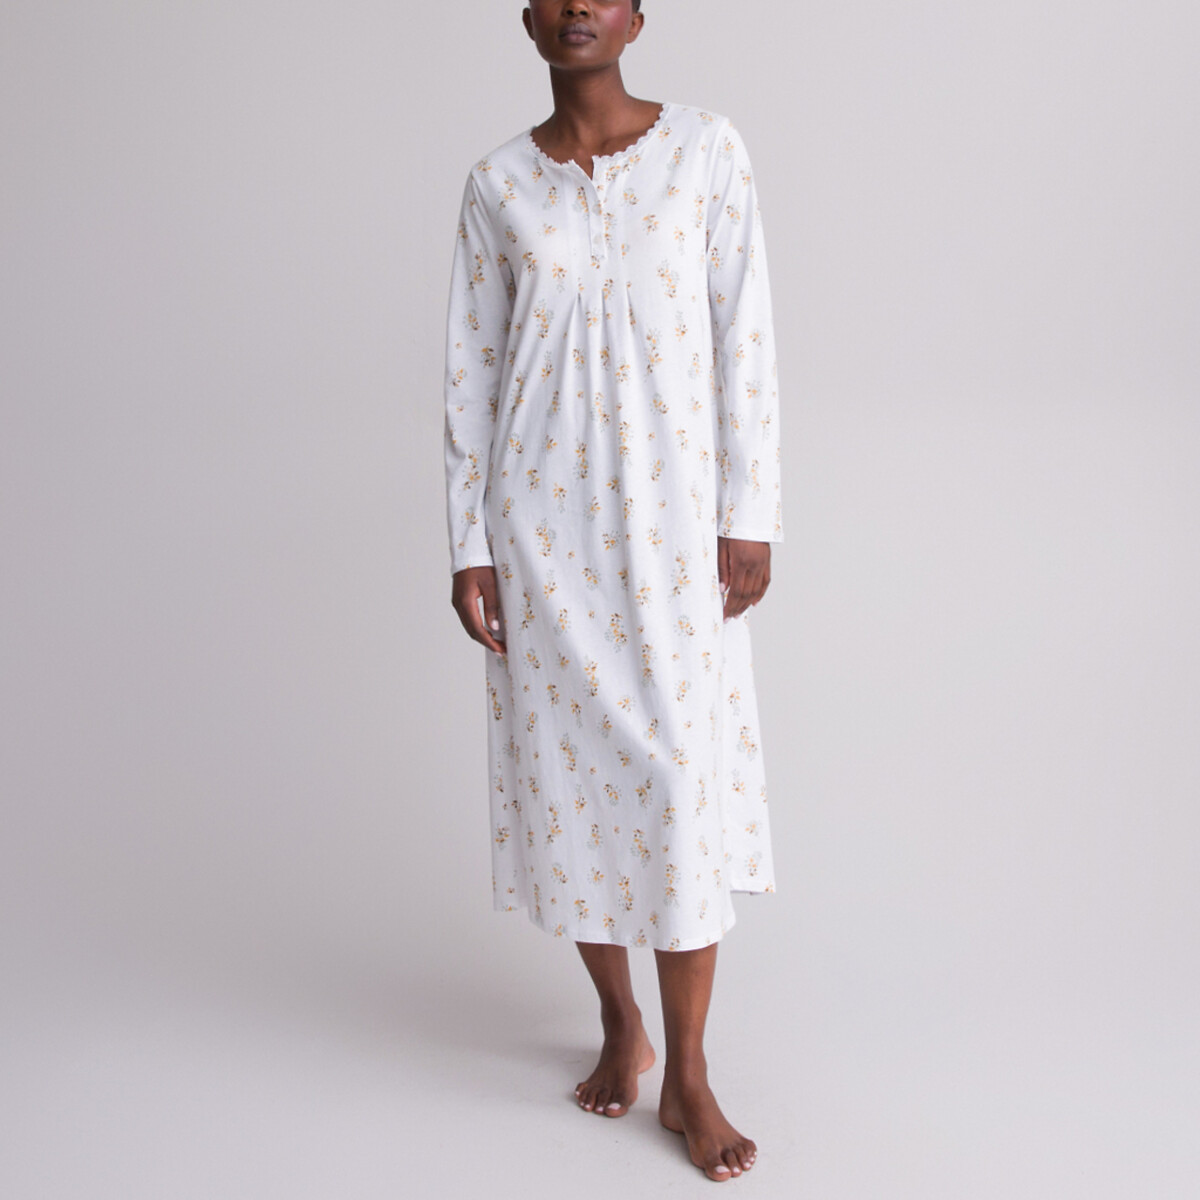 Image of Floral Print Cotton Nightdress with Long Sleeves